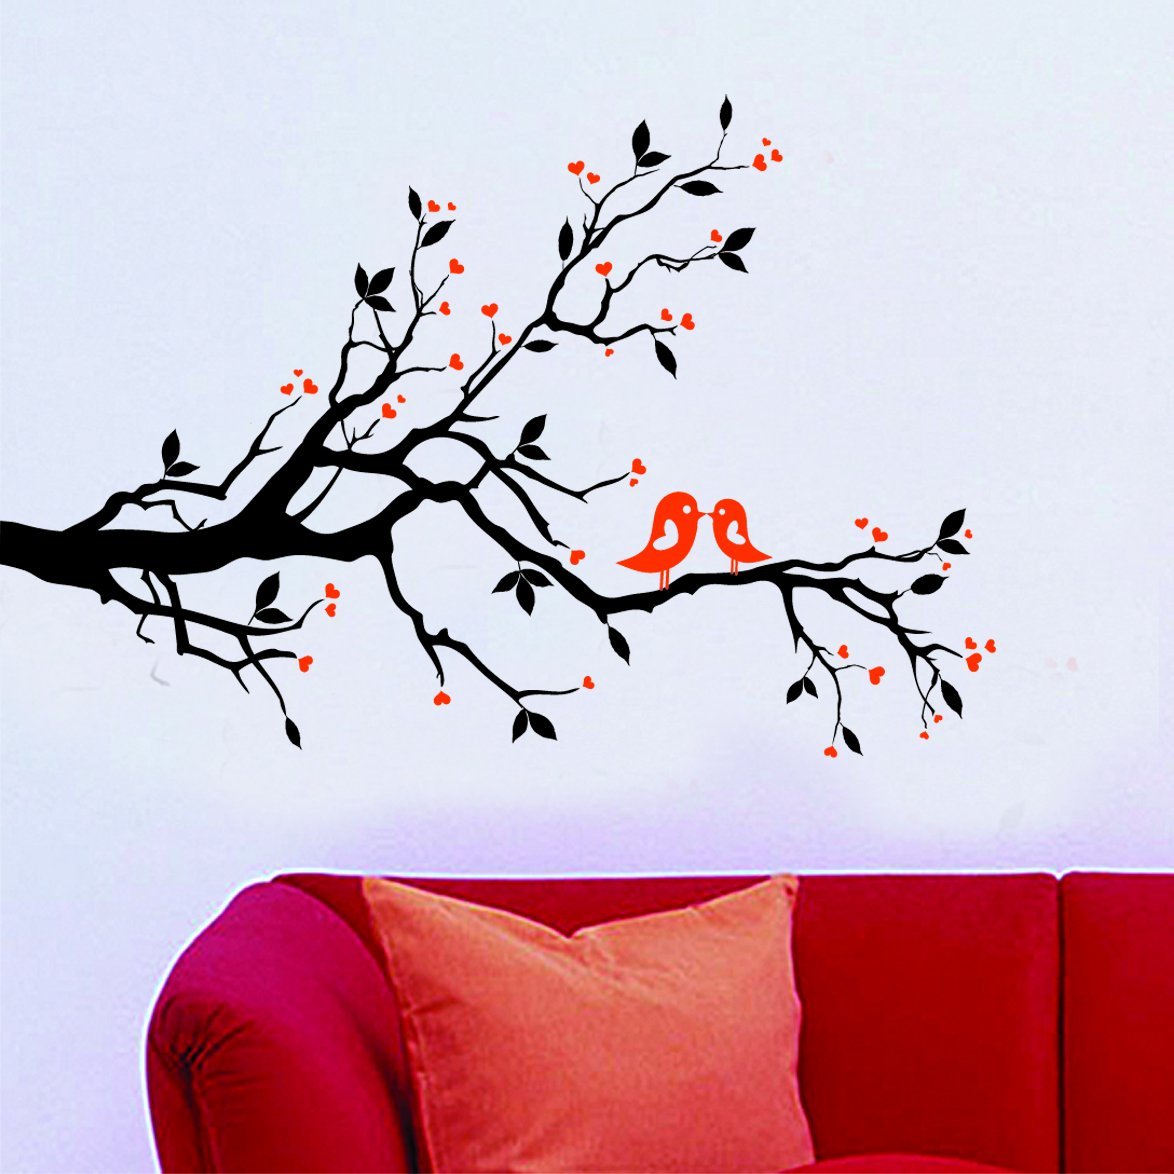 Home Sweet Home Wallstickersusa Wall Stickers